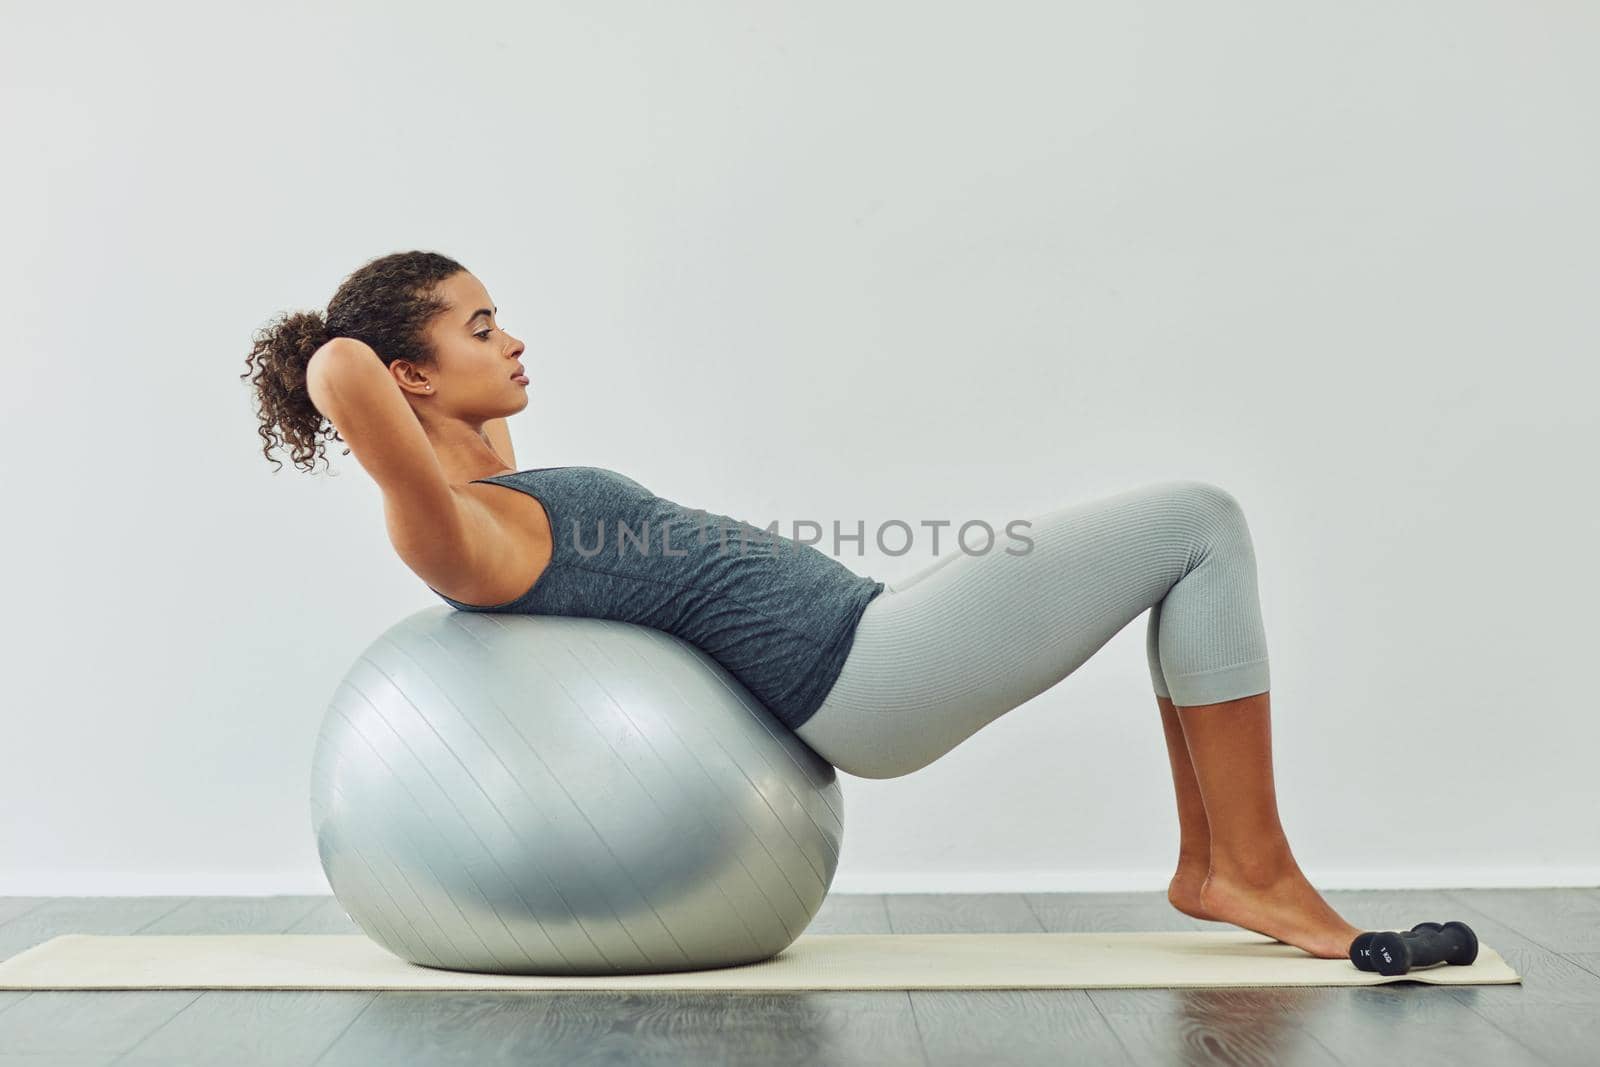 Studio shot of an attractive young woman working out against a grey background.